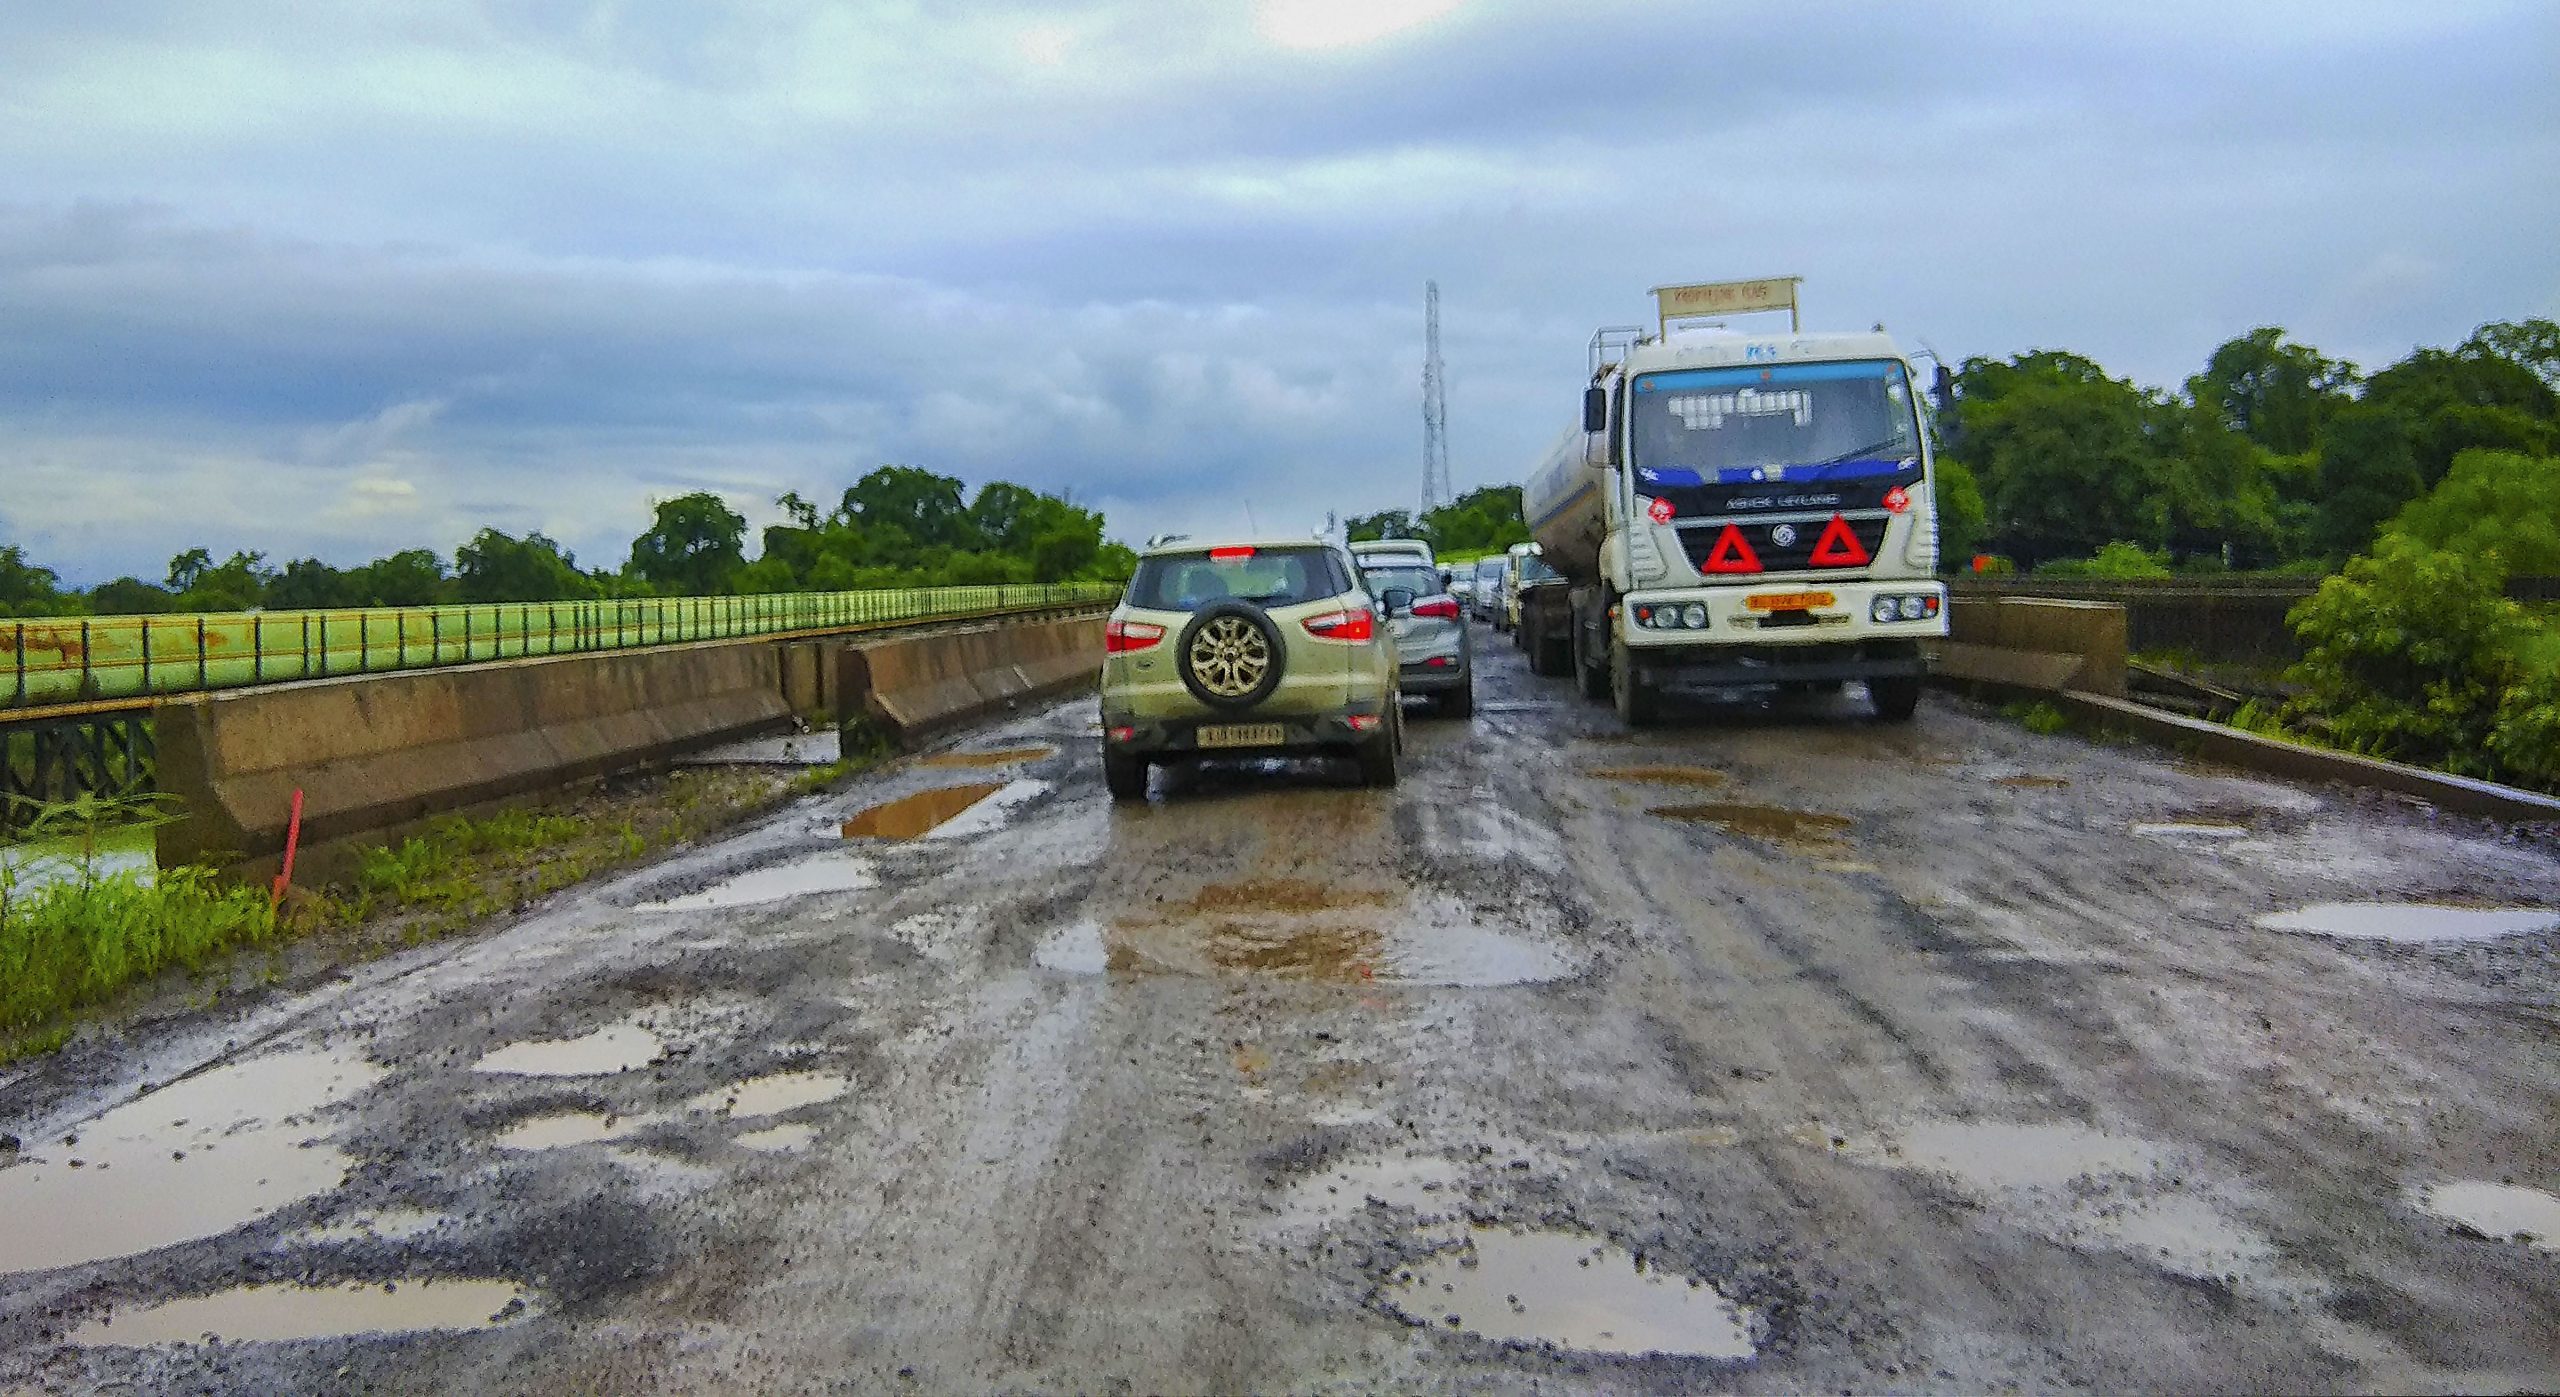 More than 3,500 accidents took place in India due to potholes in 2020: Centre